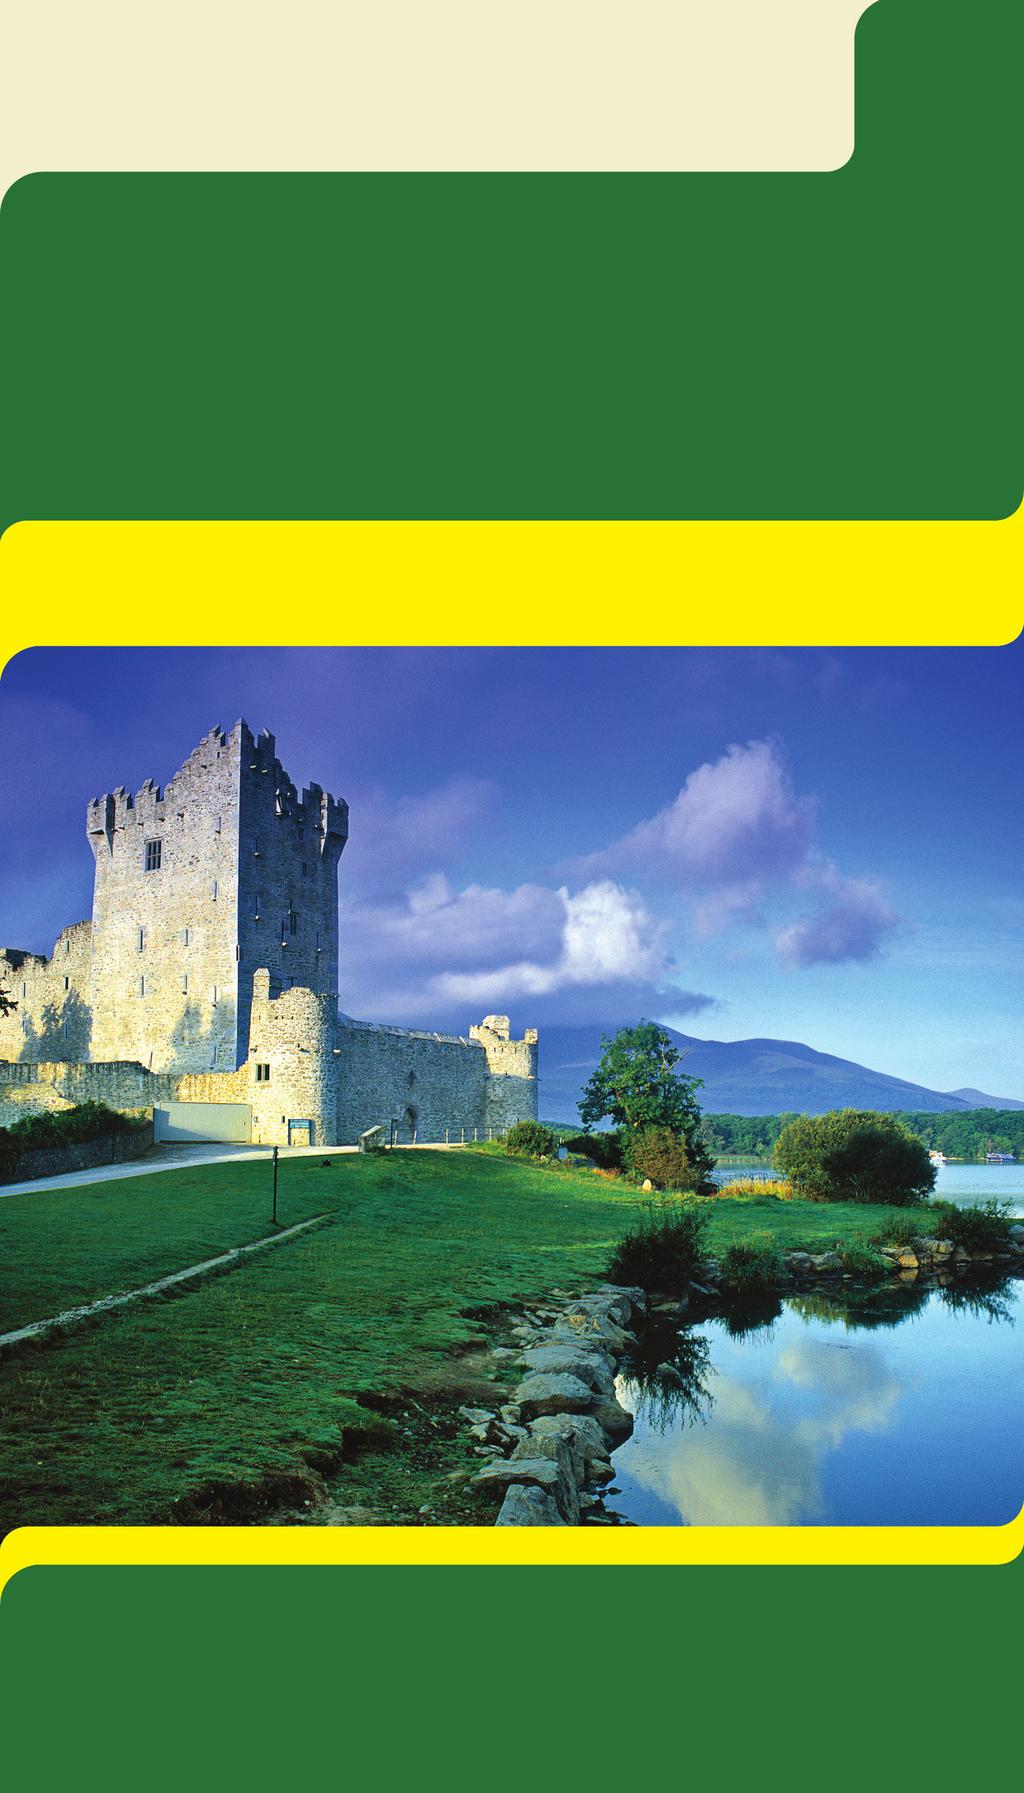 Smith College presents ENCHANTING IRELAND A Tour of the Emerald Isle August 31 September 12, 2014 13 days from $4,558 total price from Boston, New York ($4,195 air & land inclusive plus $363 airline